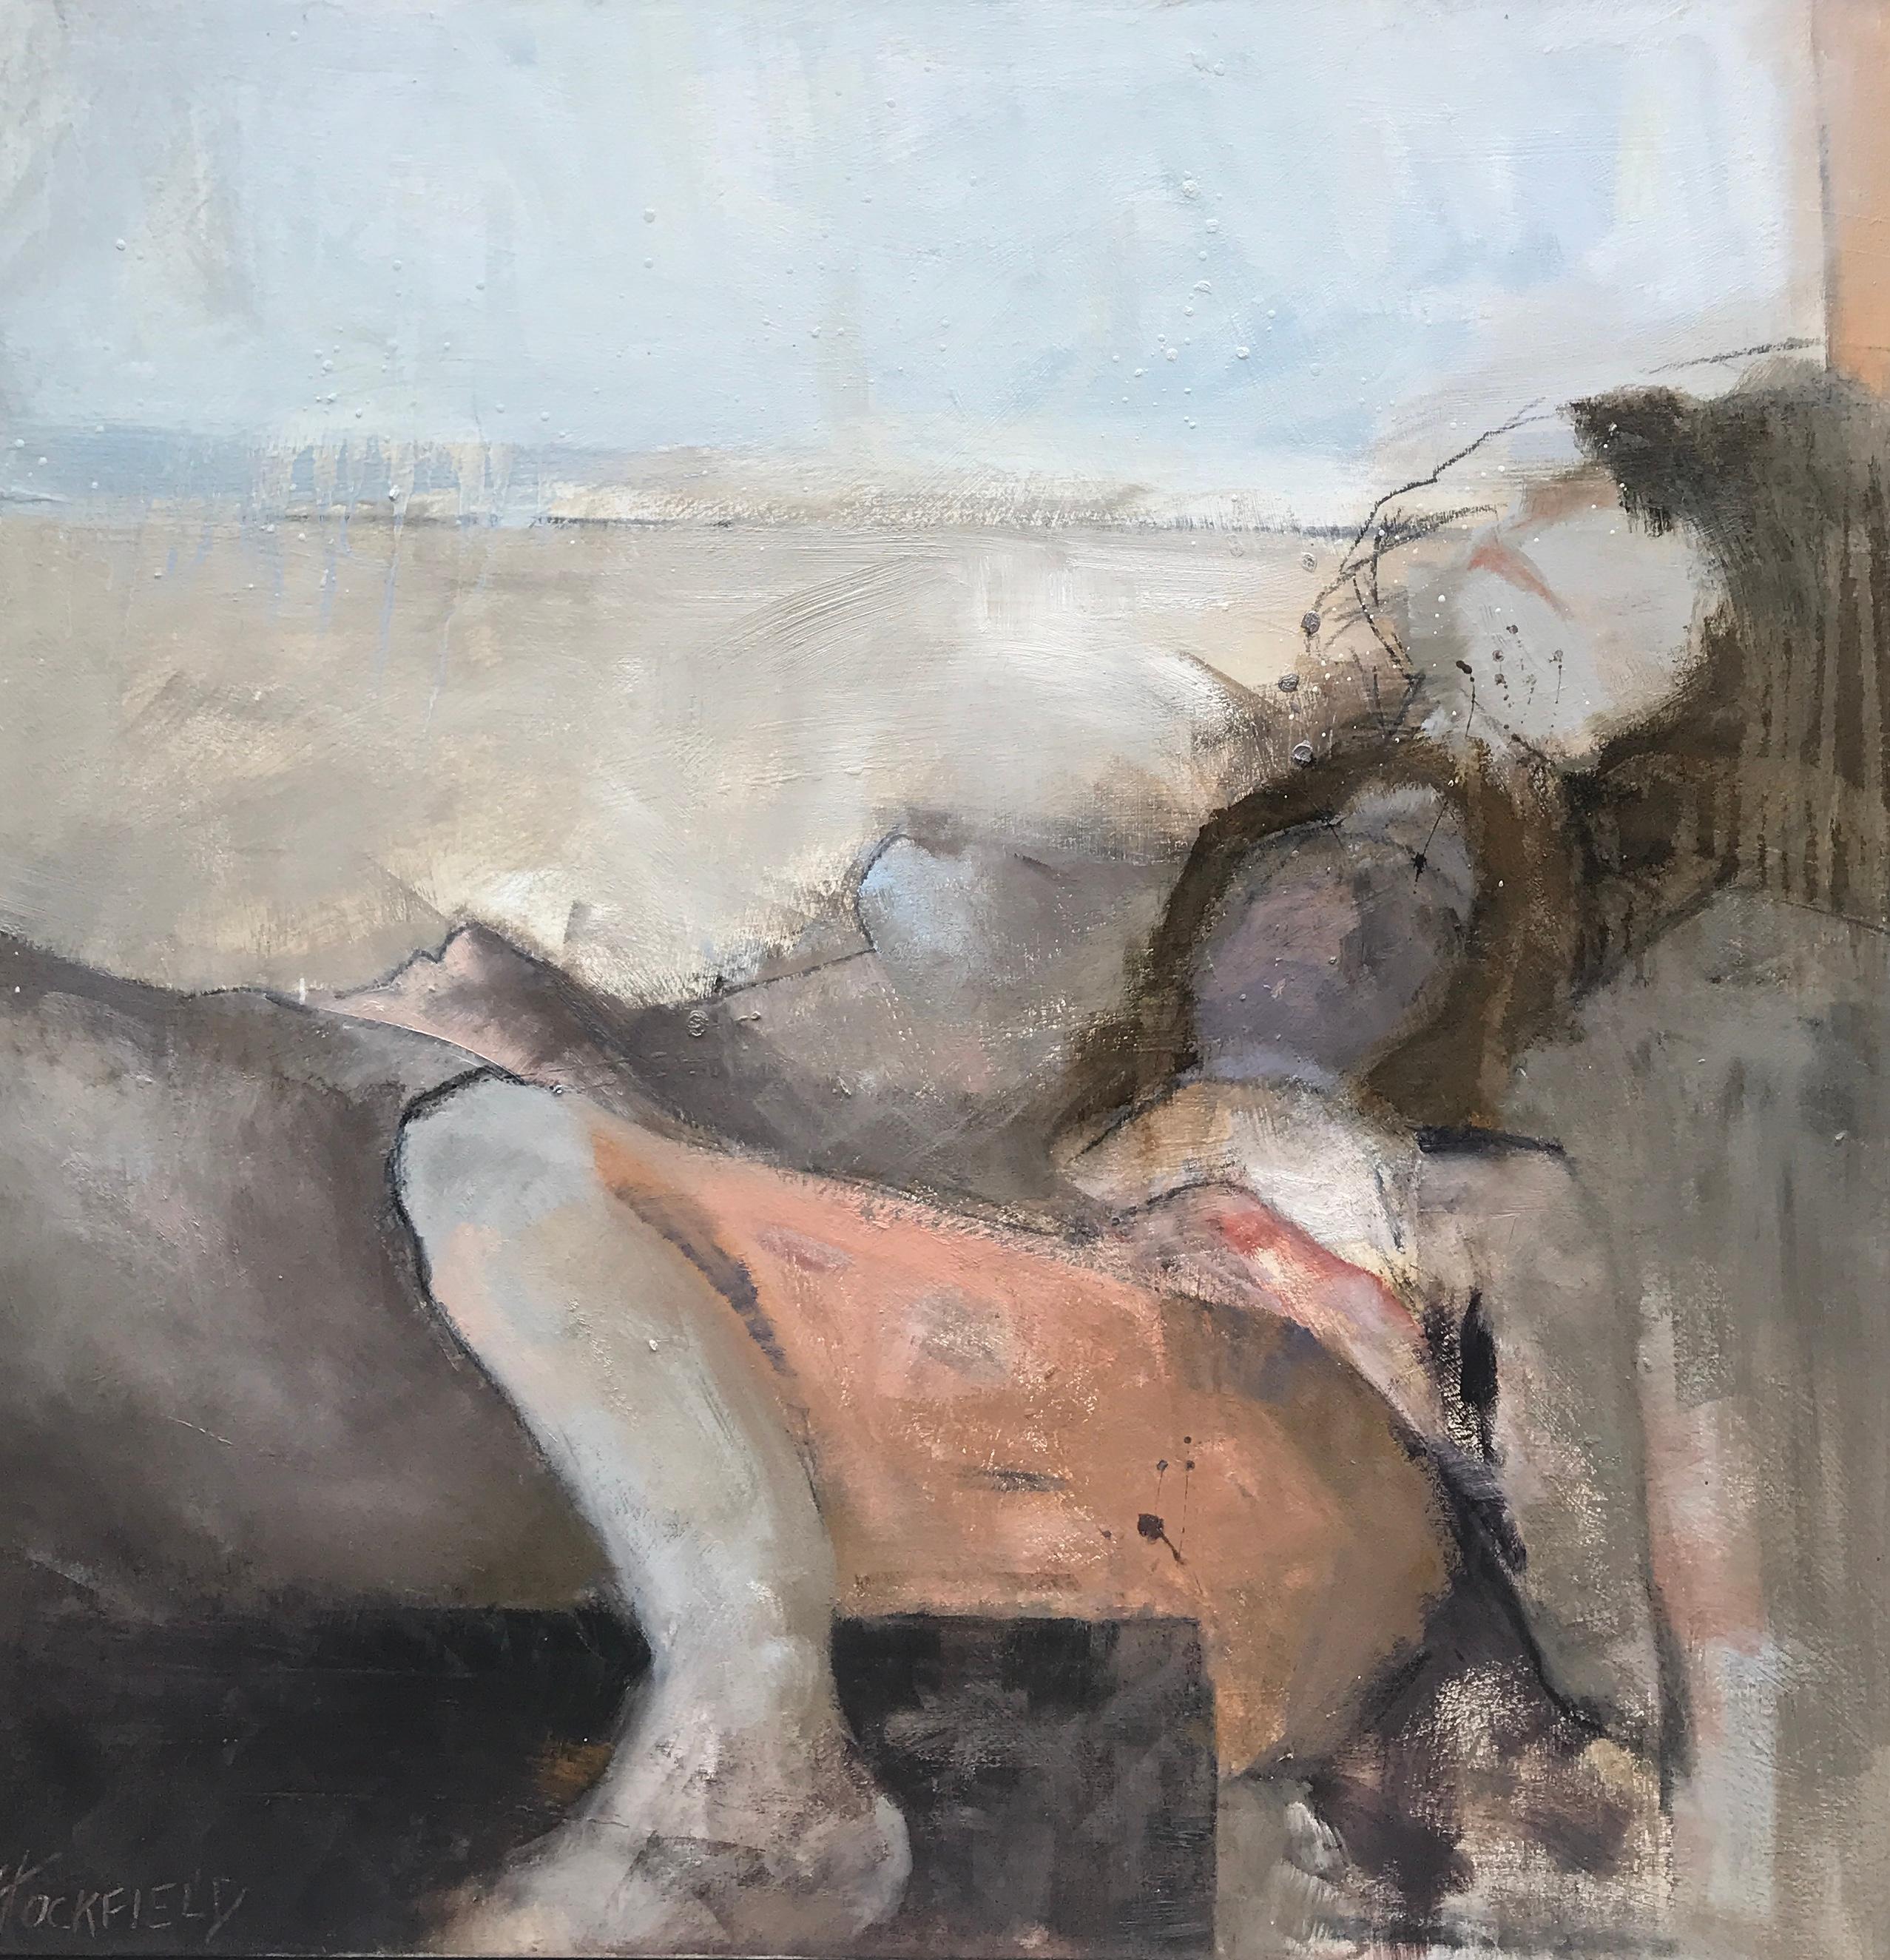 'Warmth' is a contemporary mixed media on canvas painting created by American artist Sharon Hockfield in 2018. Featuring a square format, the painting depicts a woman dressed in a peach skirt, casually lying on a surface that we cannot identify.